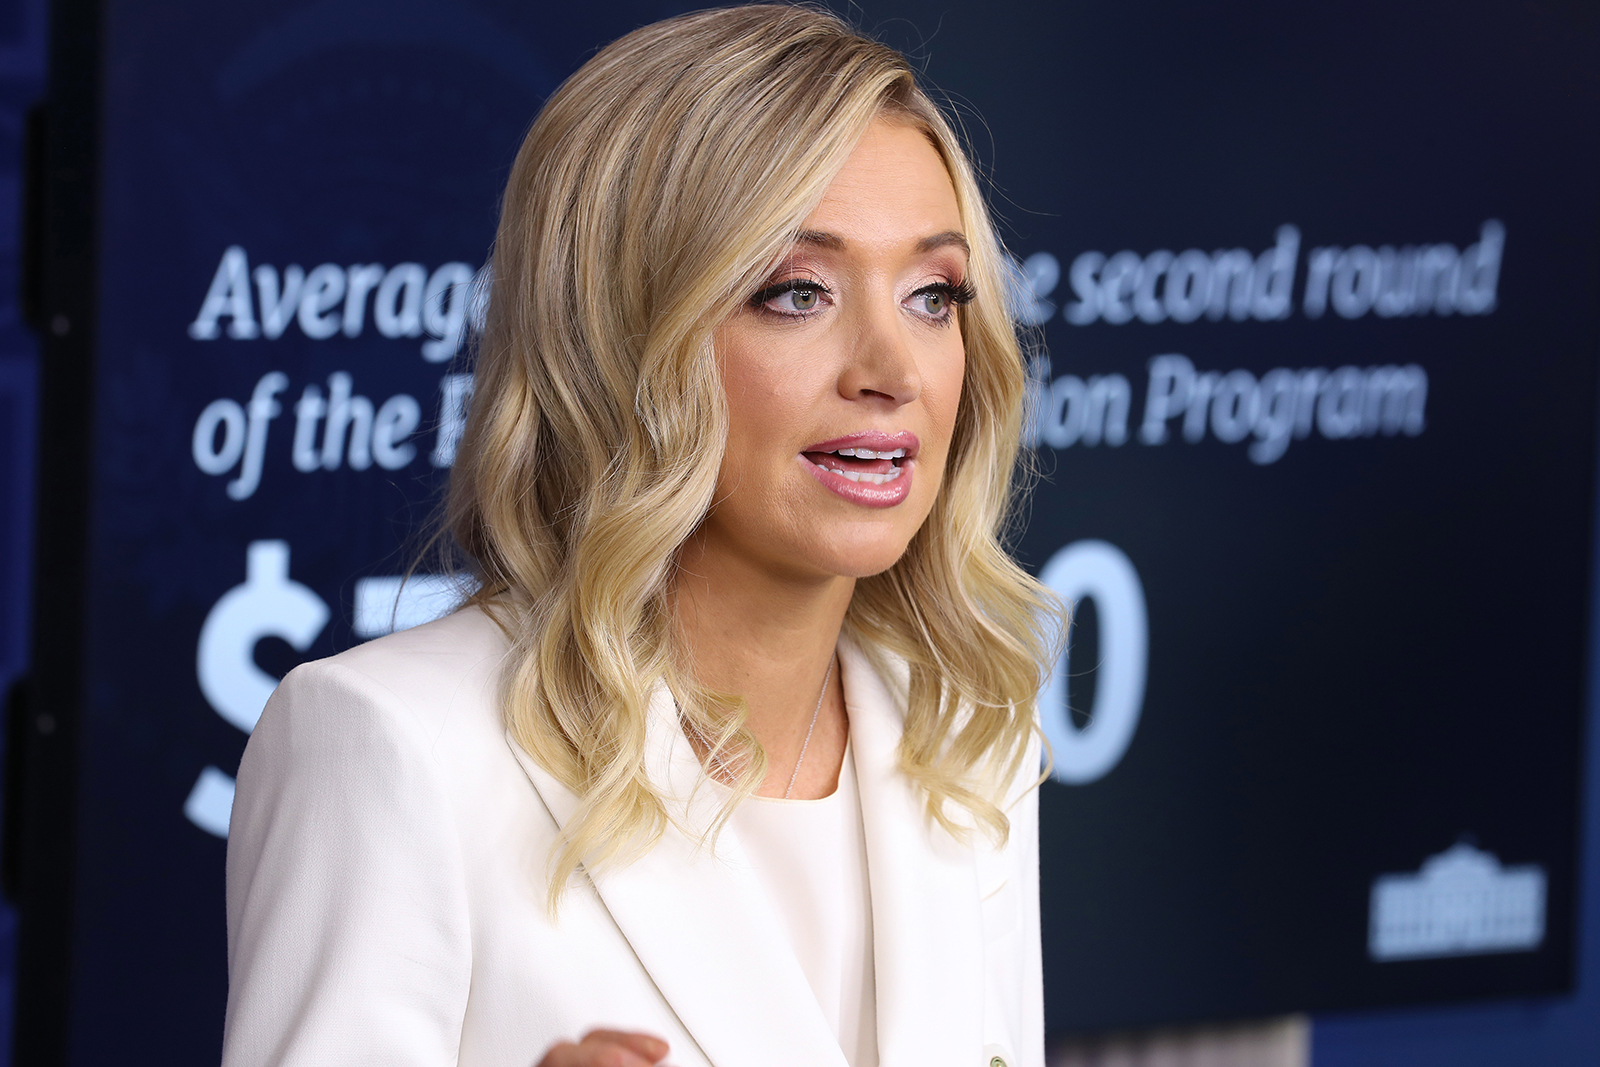 White House Press Secretary Kayleigh McEnany speaks during a White House Press Briefing on Wednesday, May 6.